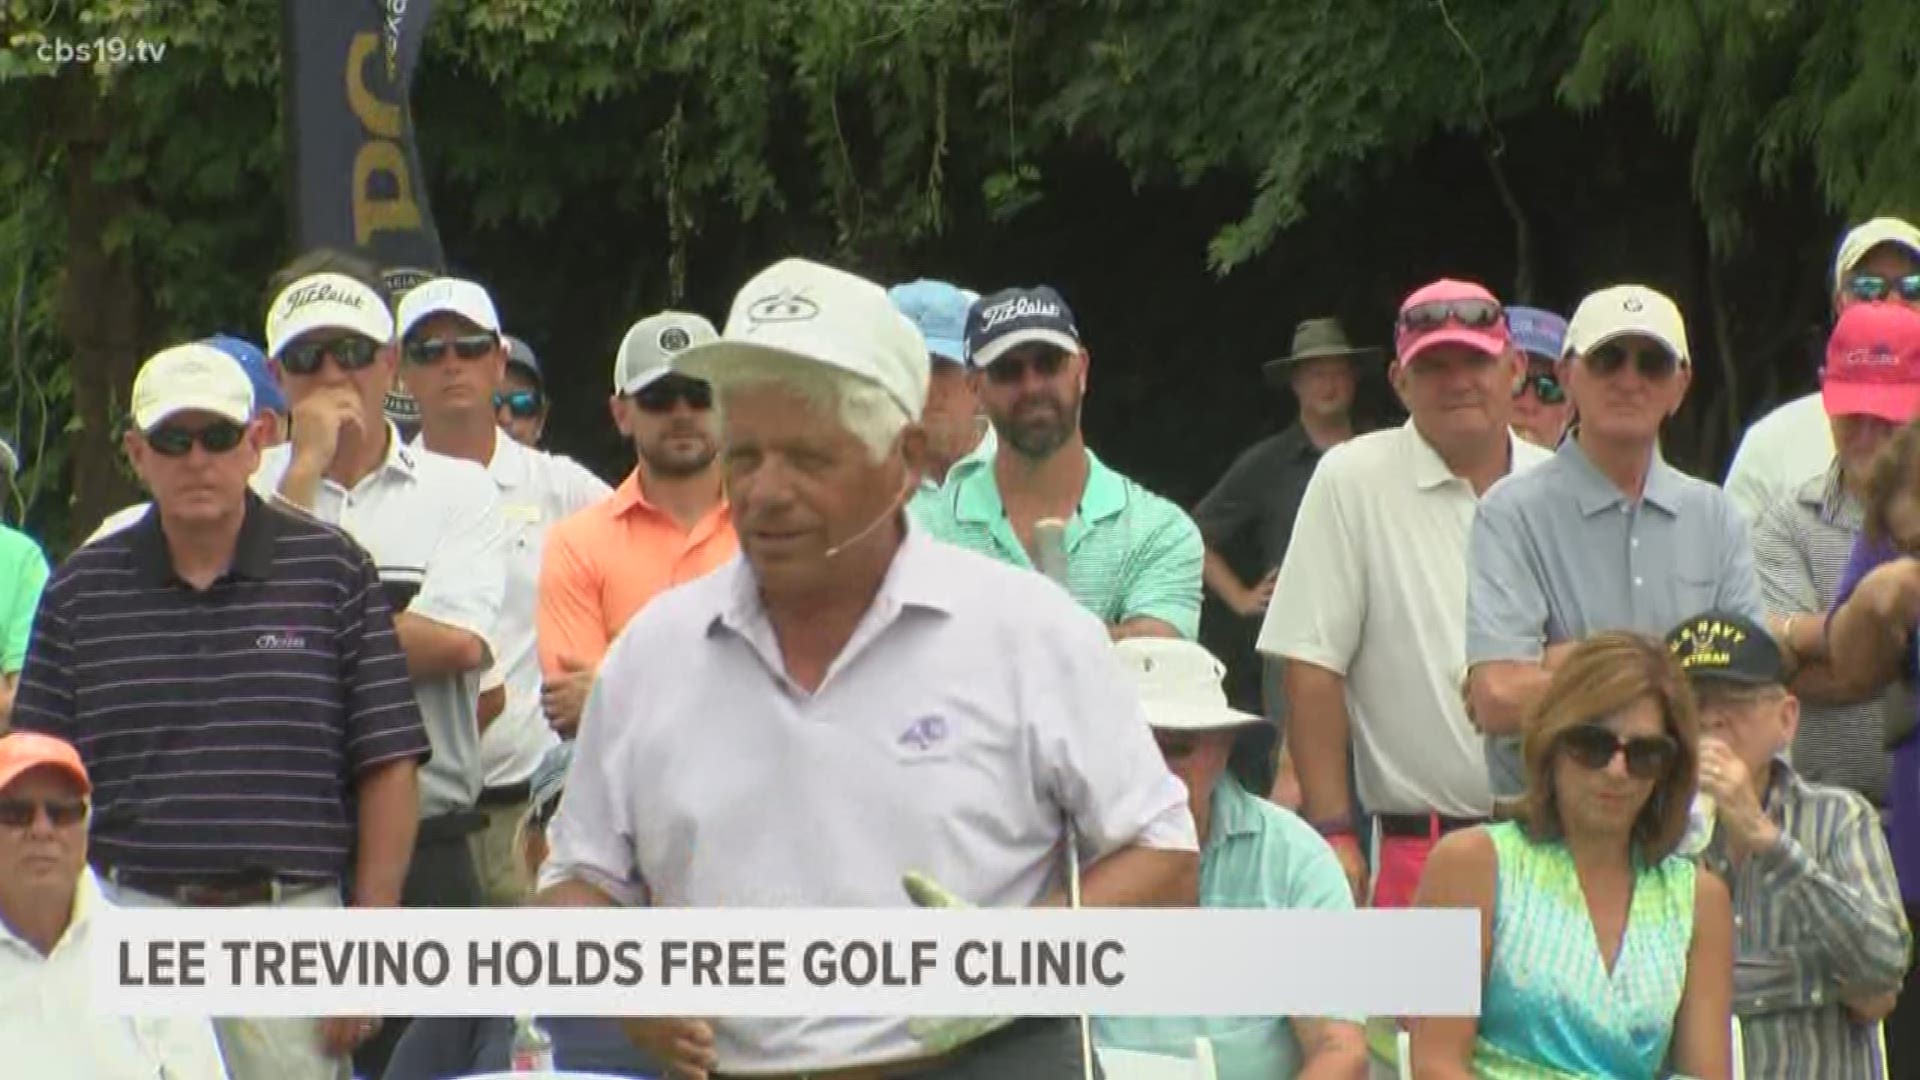 Lee Trevino conducts free golf clinic in Tyler cbs19